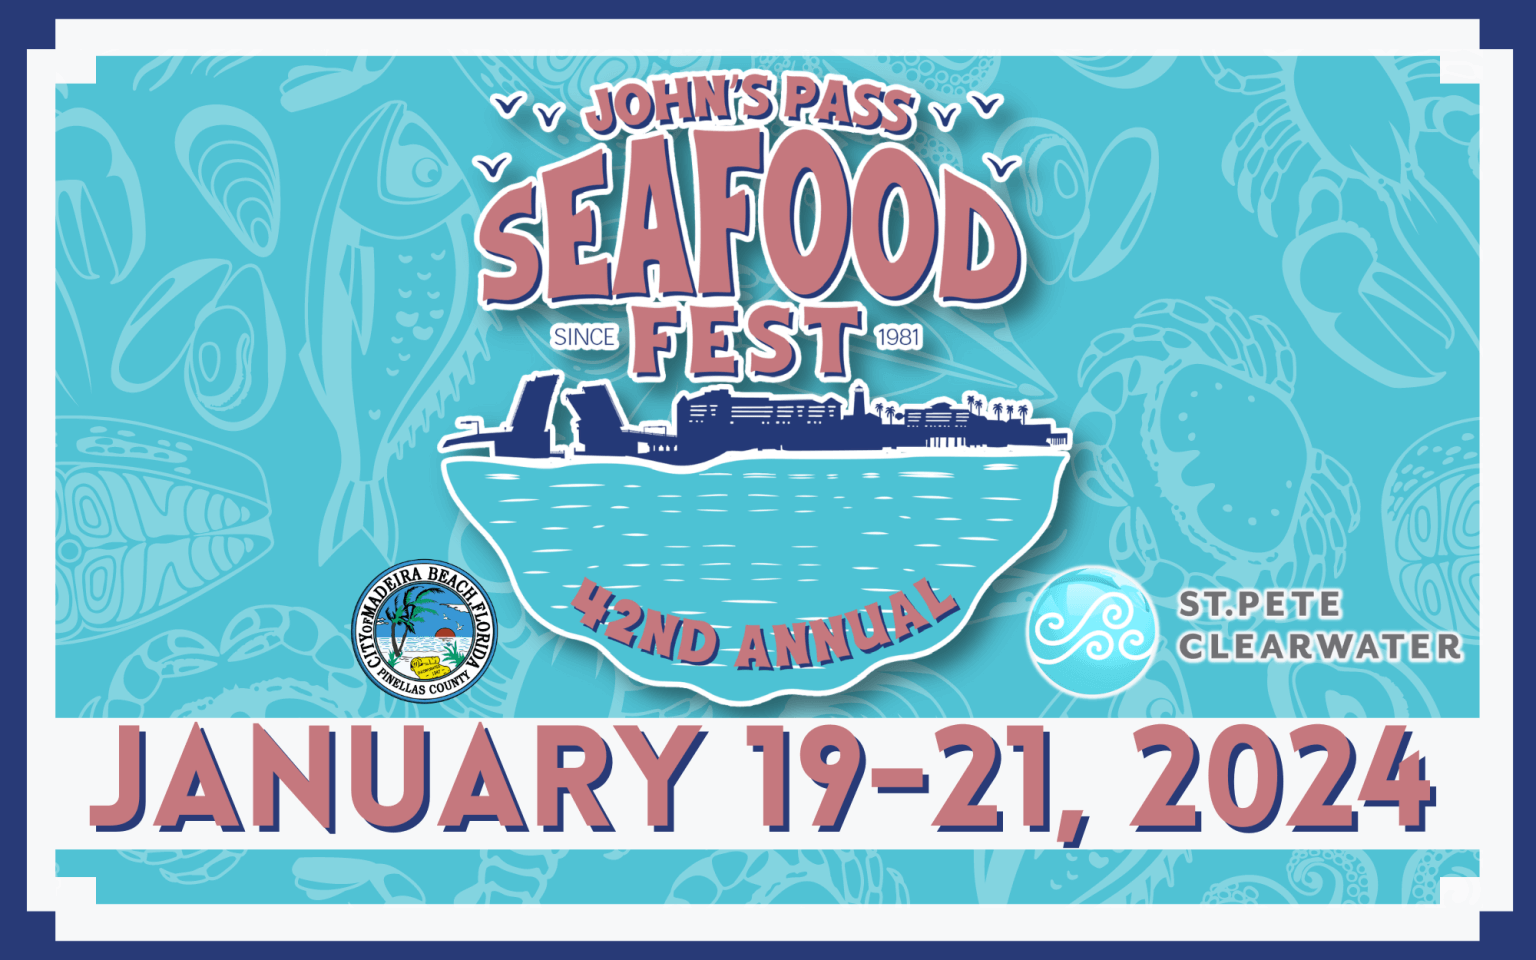 42nd Annual Johns Pass Seafood Festival